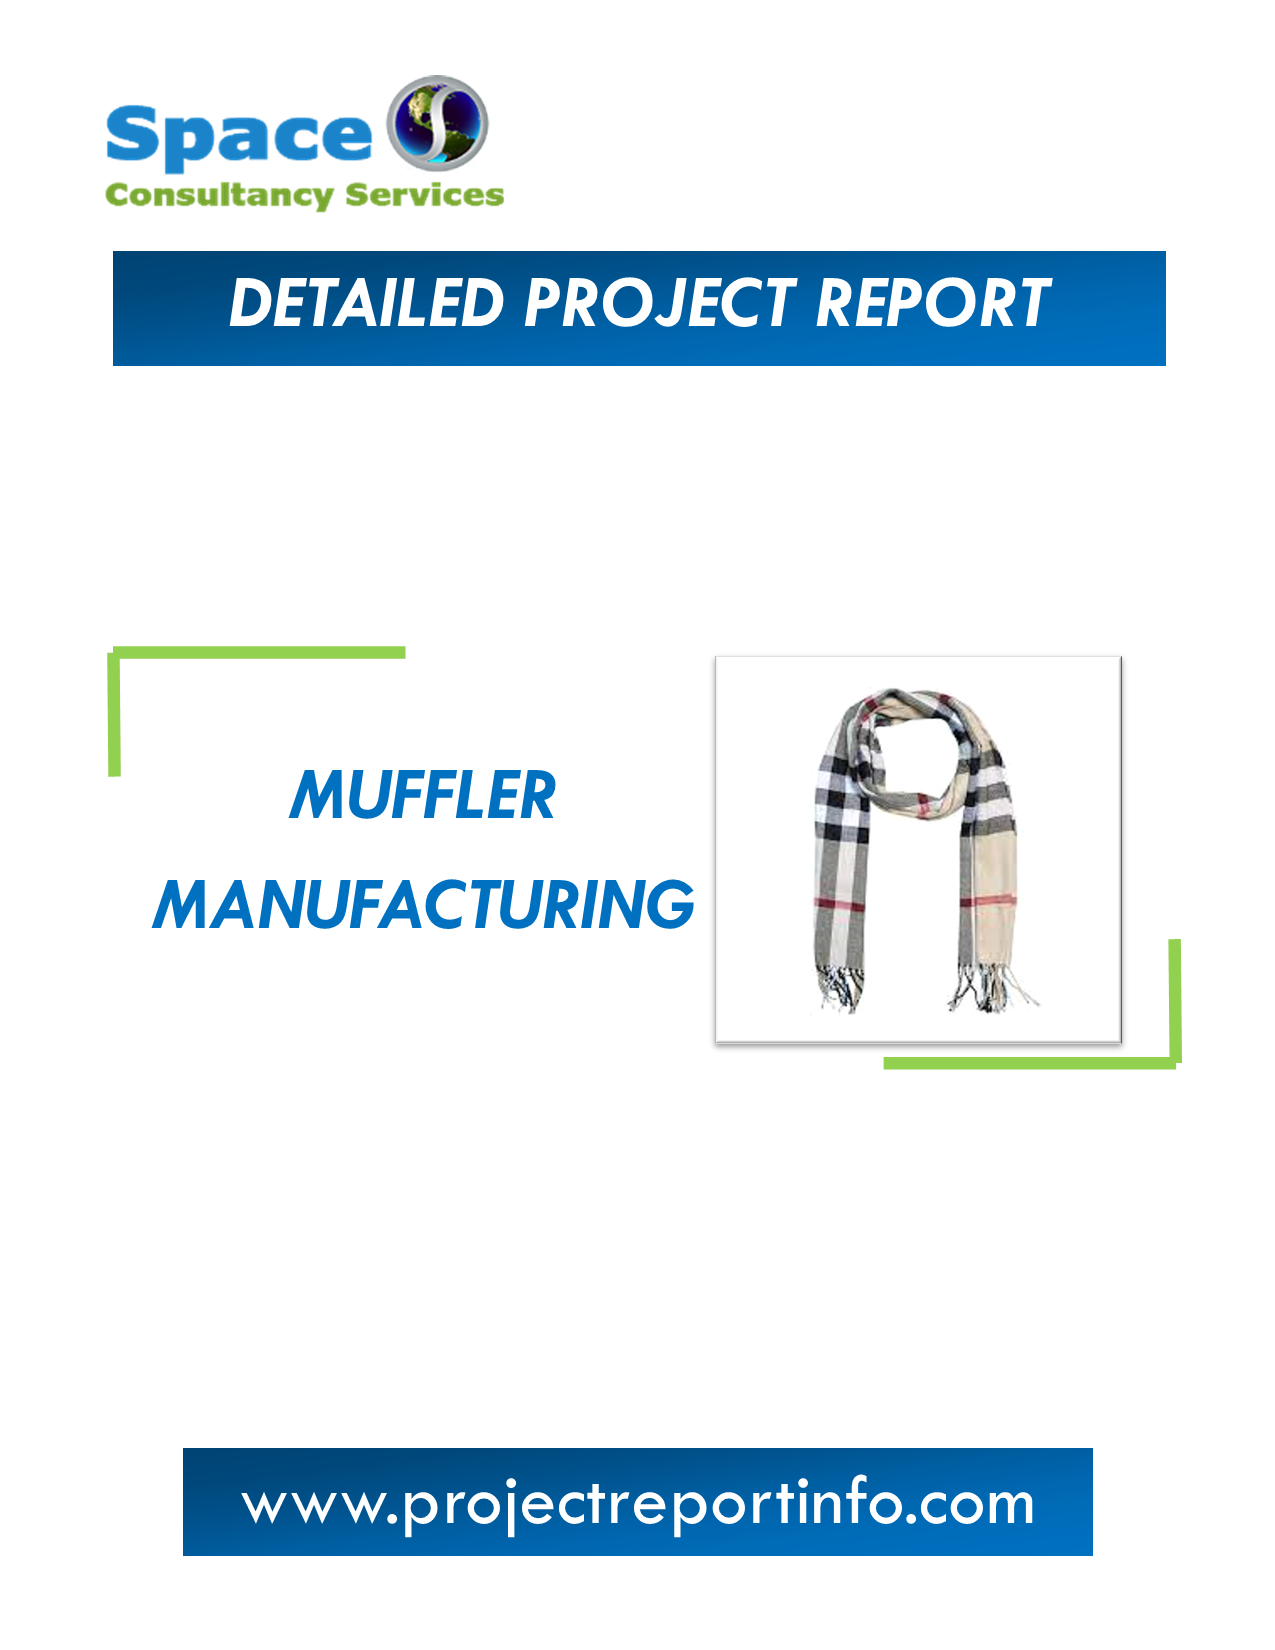 Project Report on Muffler Manufacturing